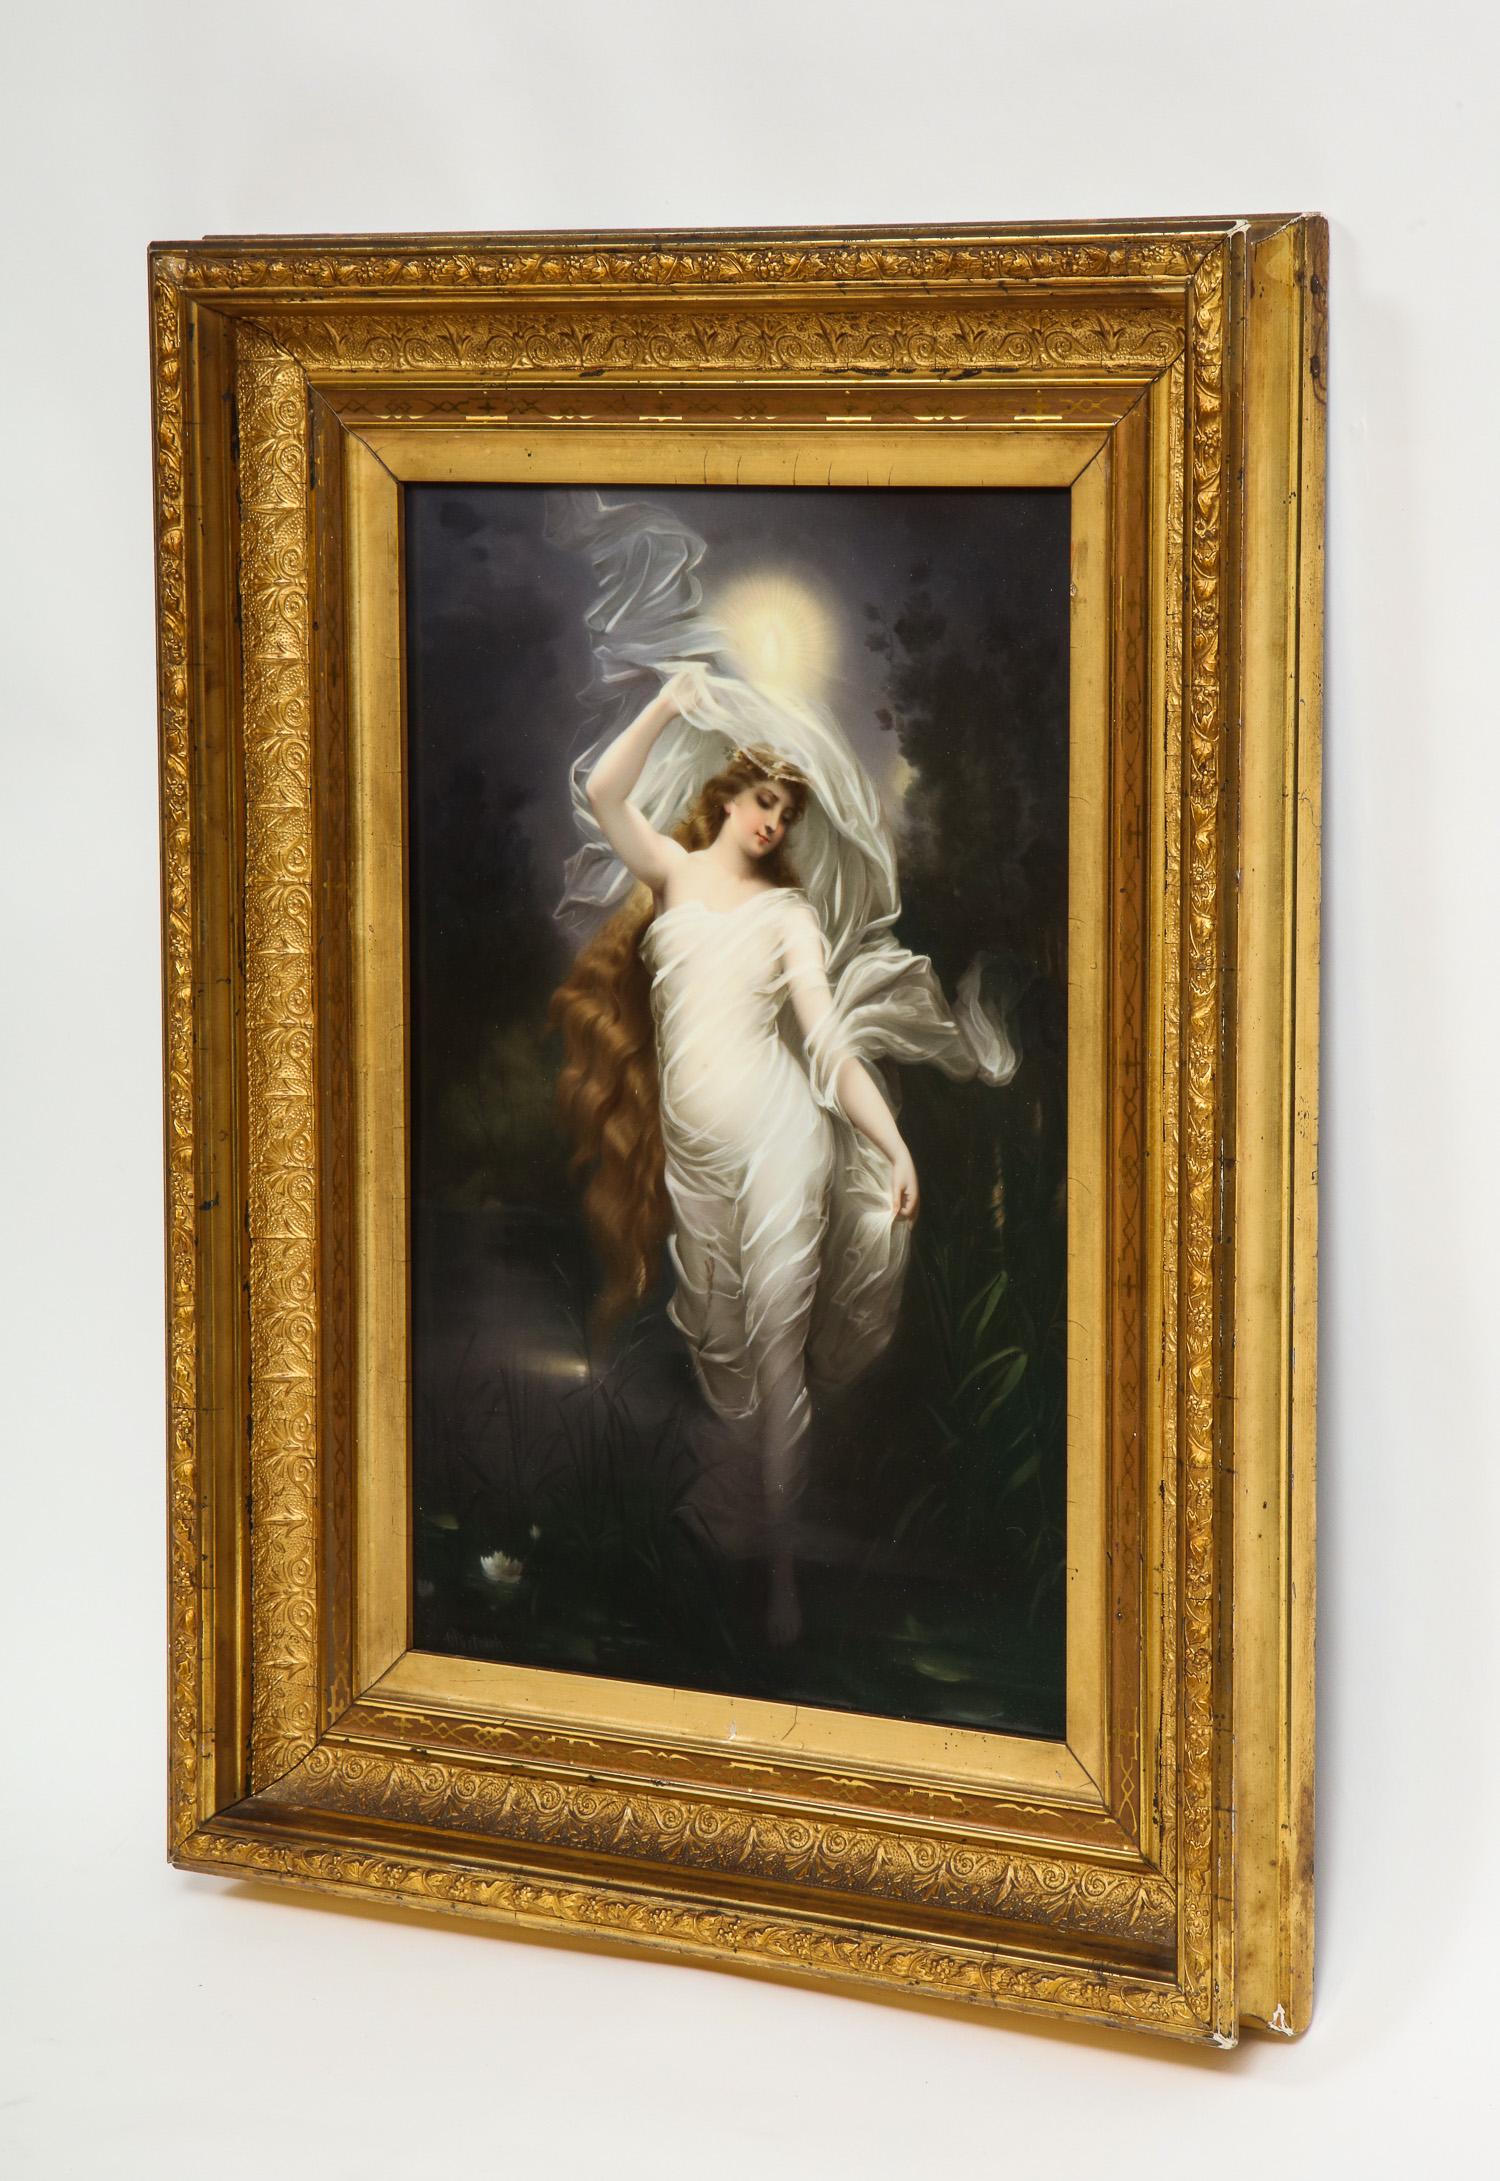 Large and Exceptional Berlin KPM Porcelain Plaque of Female Maiden, Dietrich 2